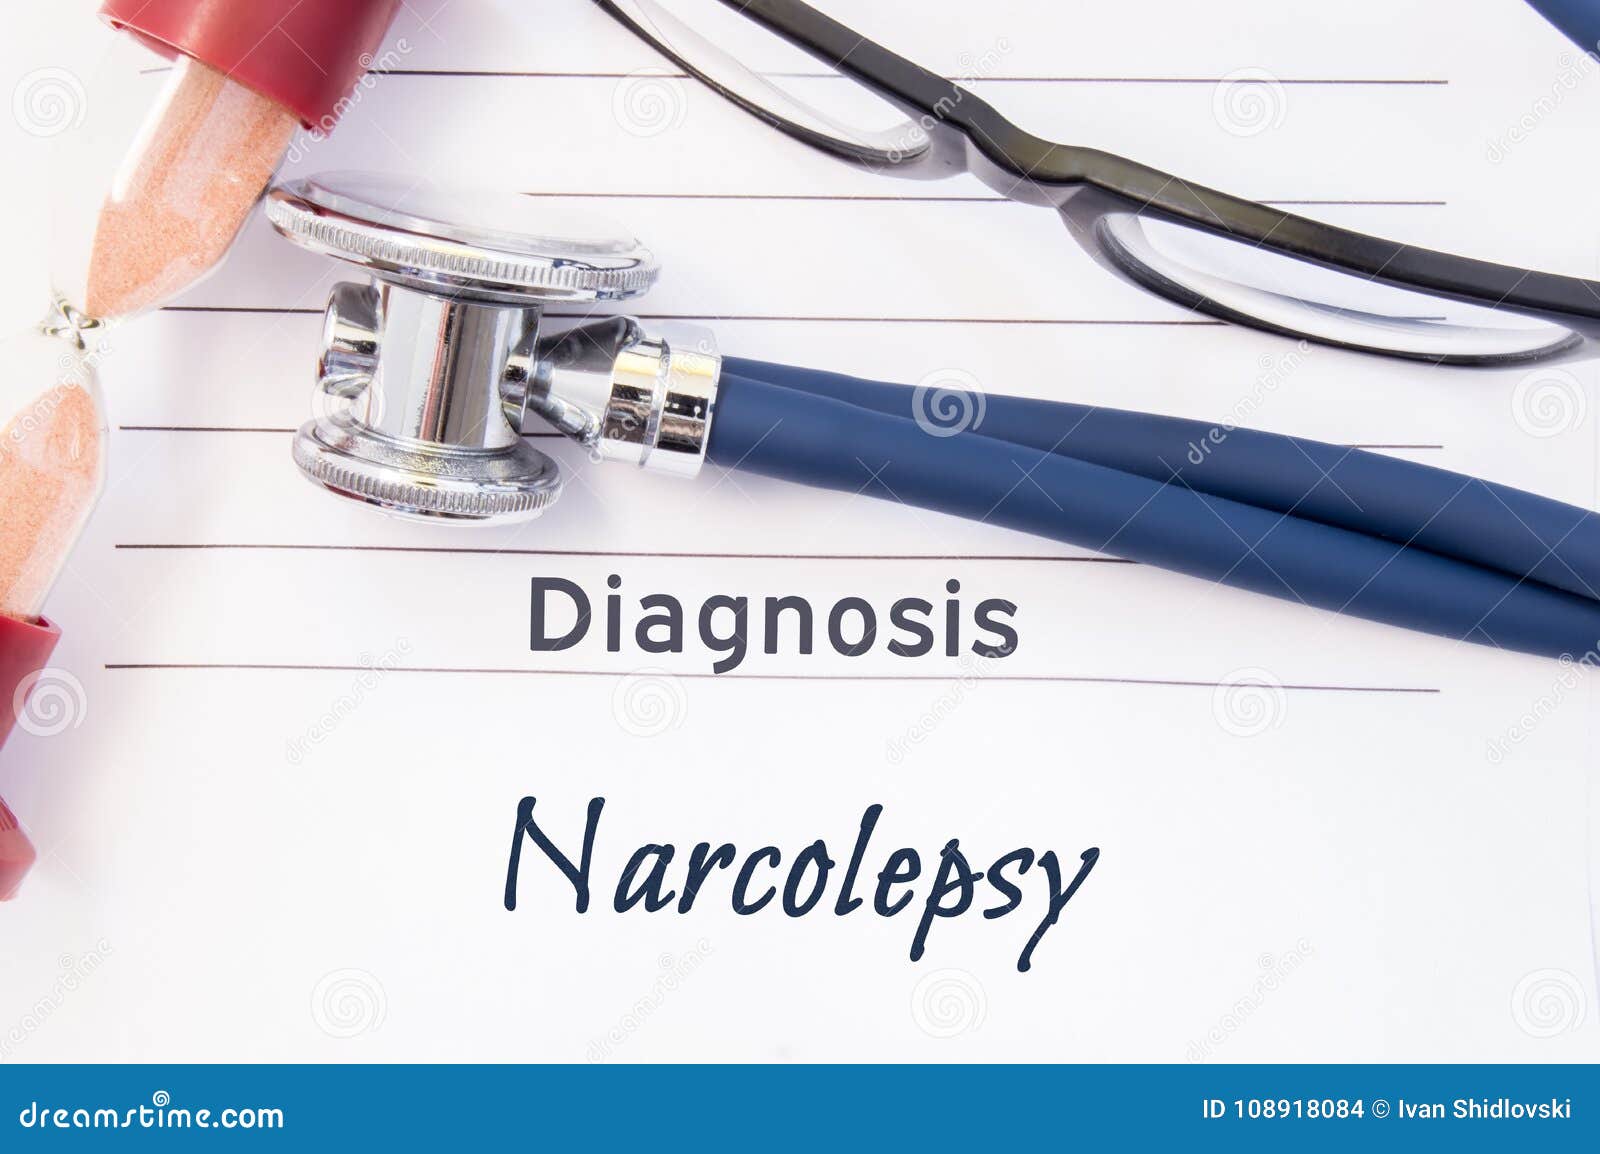 diagnosis narcolepsy. psychiatric diagnosis narcolepsy is written on paper, on which lay stethoscope and hourglass for measuring t